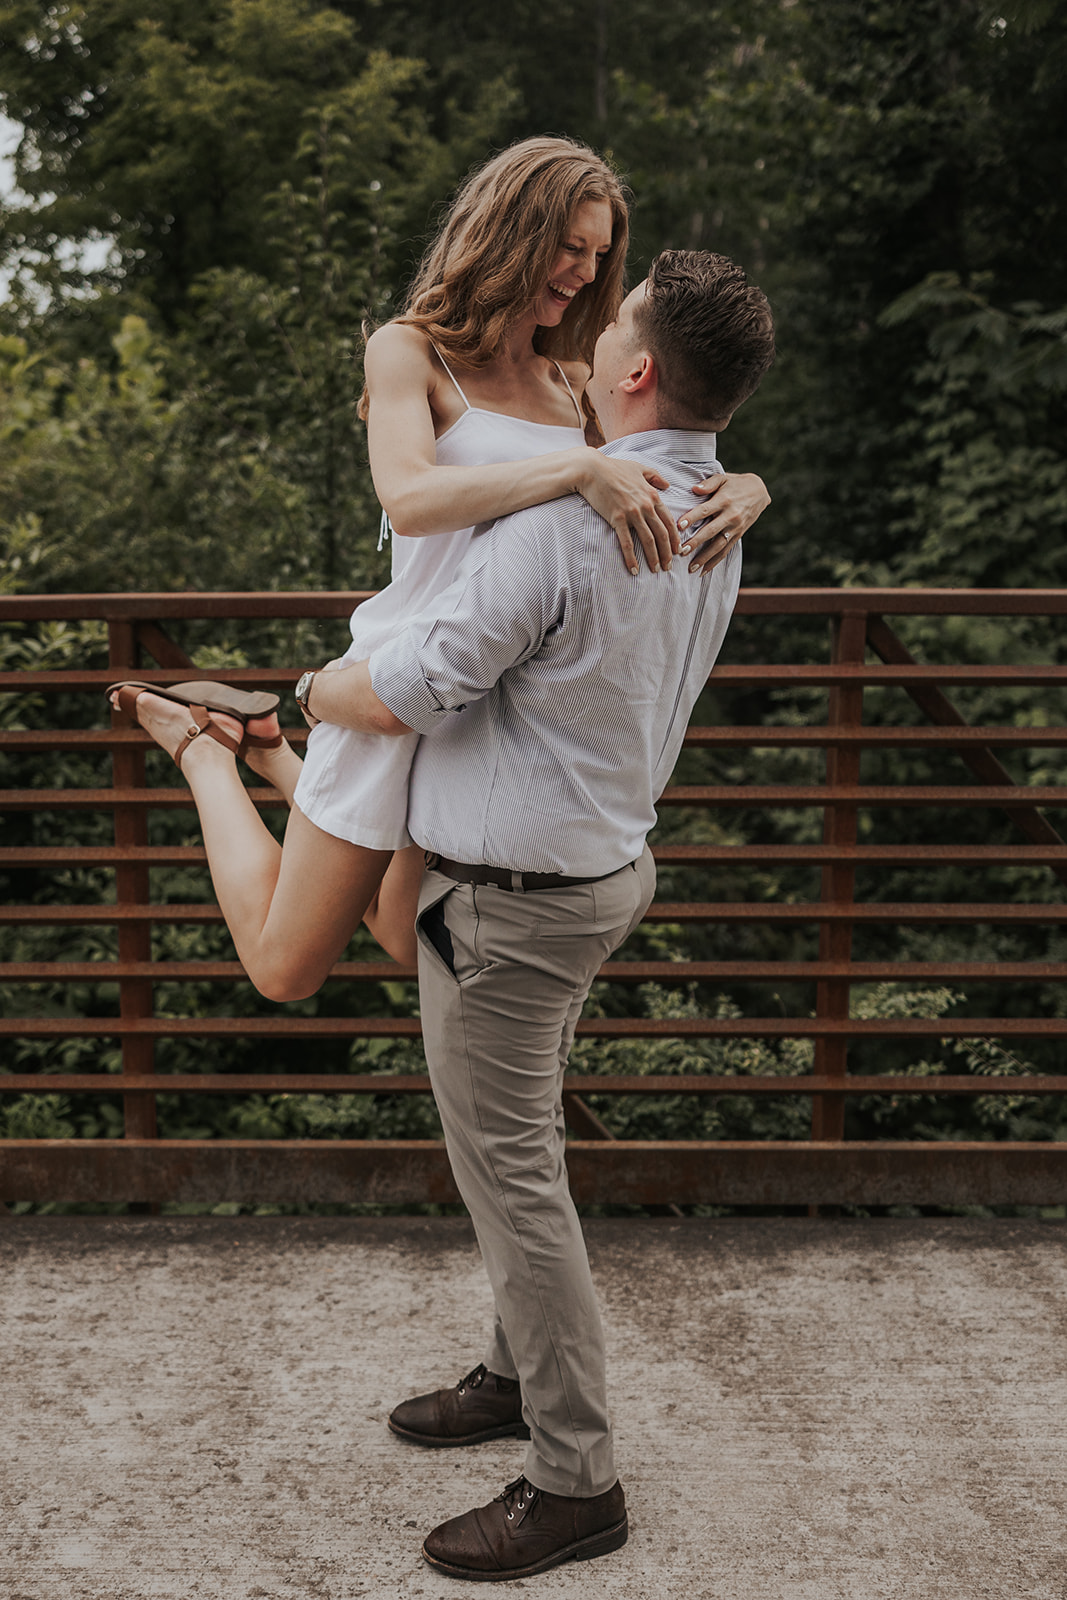 Stunning lady jumps into her fiance's arm on a pedestrian bridge during their engagement shoot!